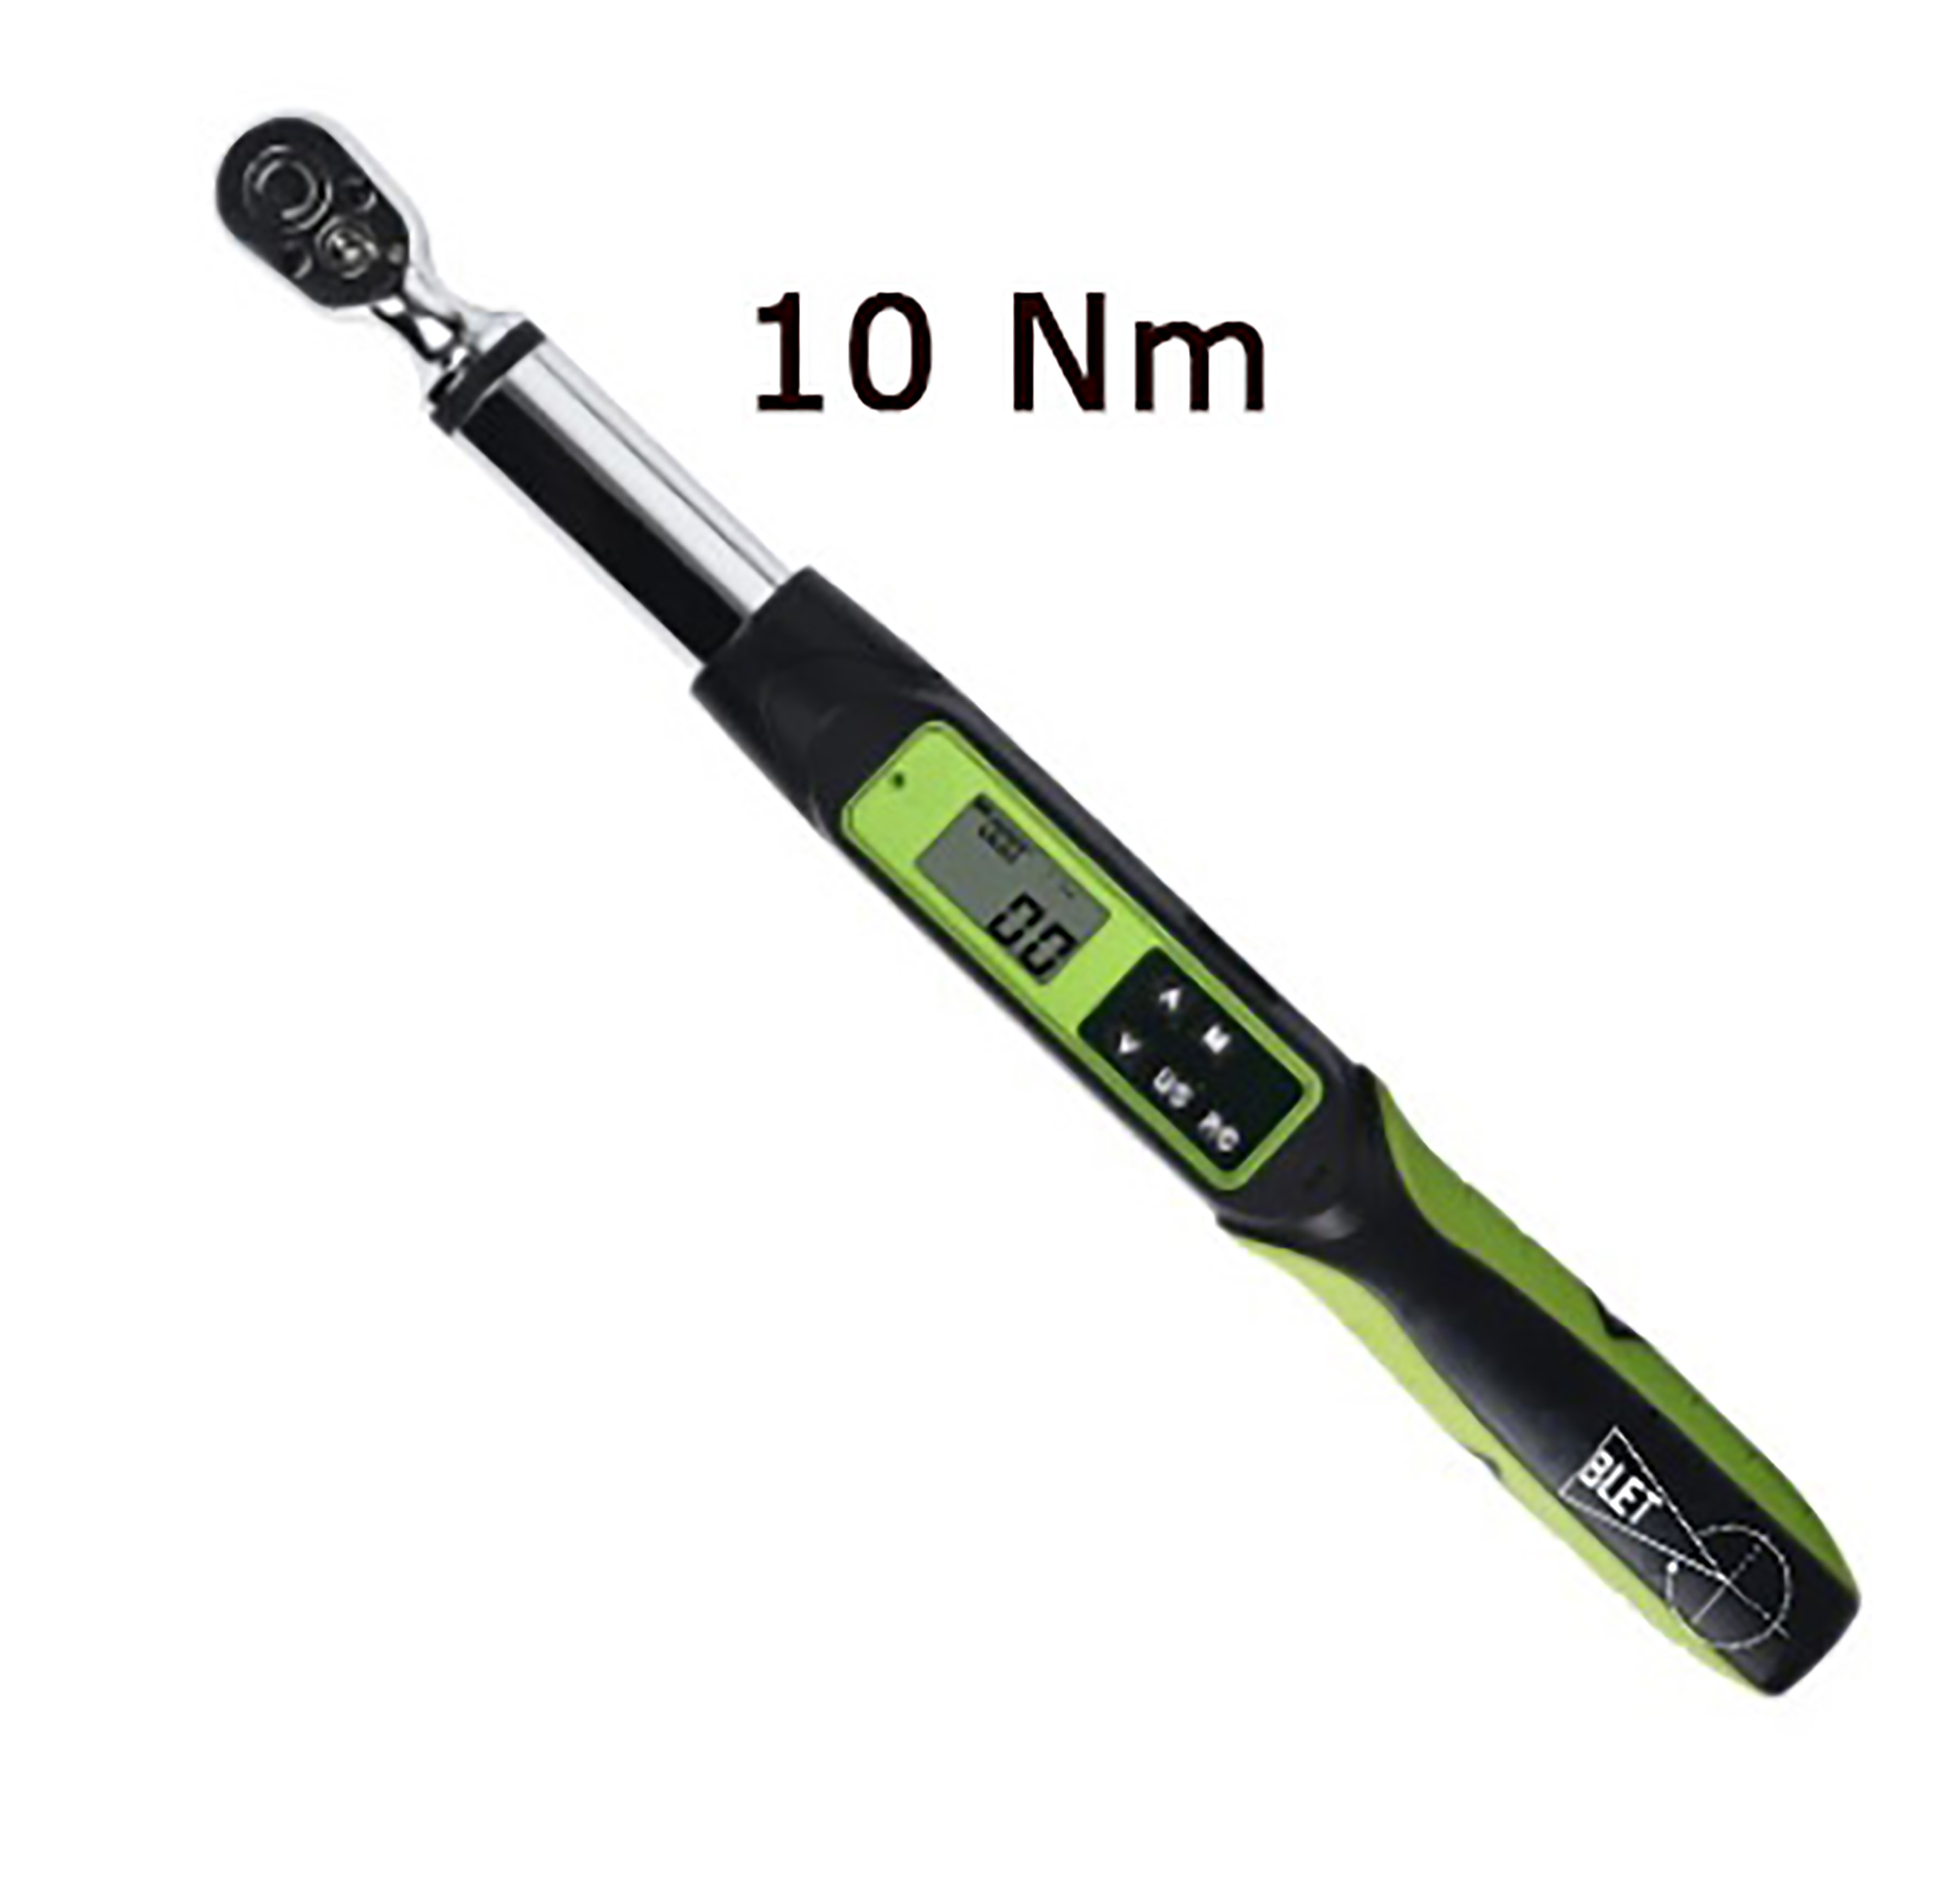 DIGITAL TORQUE ANGLE WRENCH WITH COMMUNICATION 10 Nm READING 0,01 Nm SIZE 1/4" BLET<br>Ref : CLET5-CDB01014